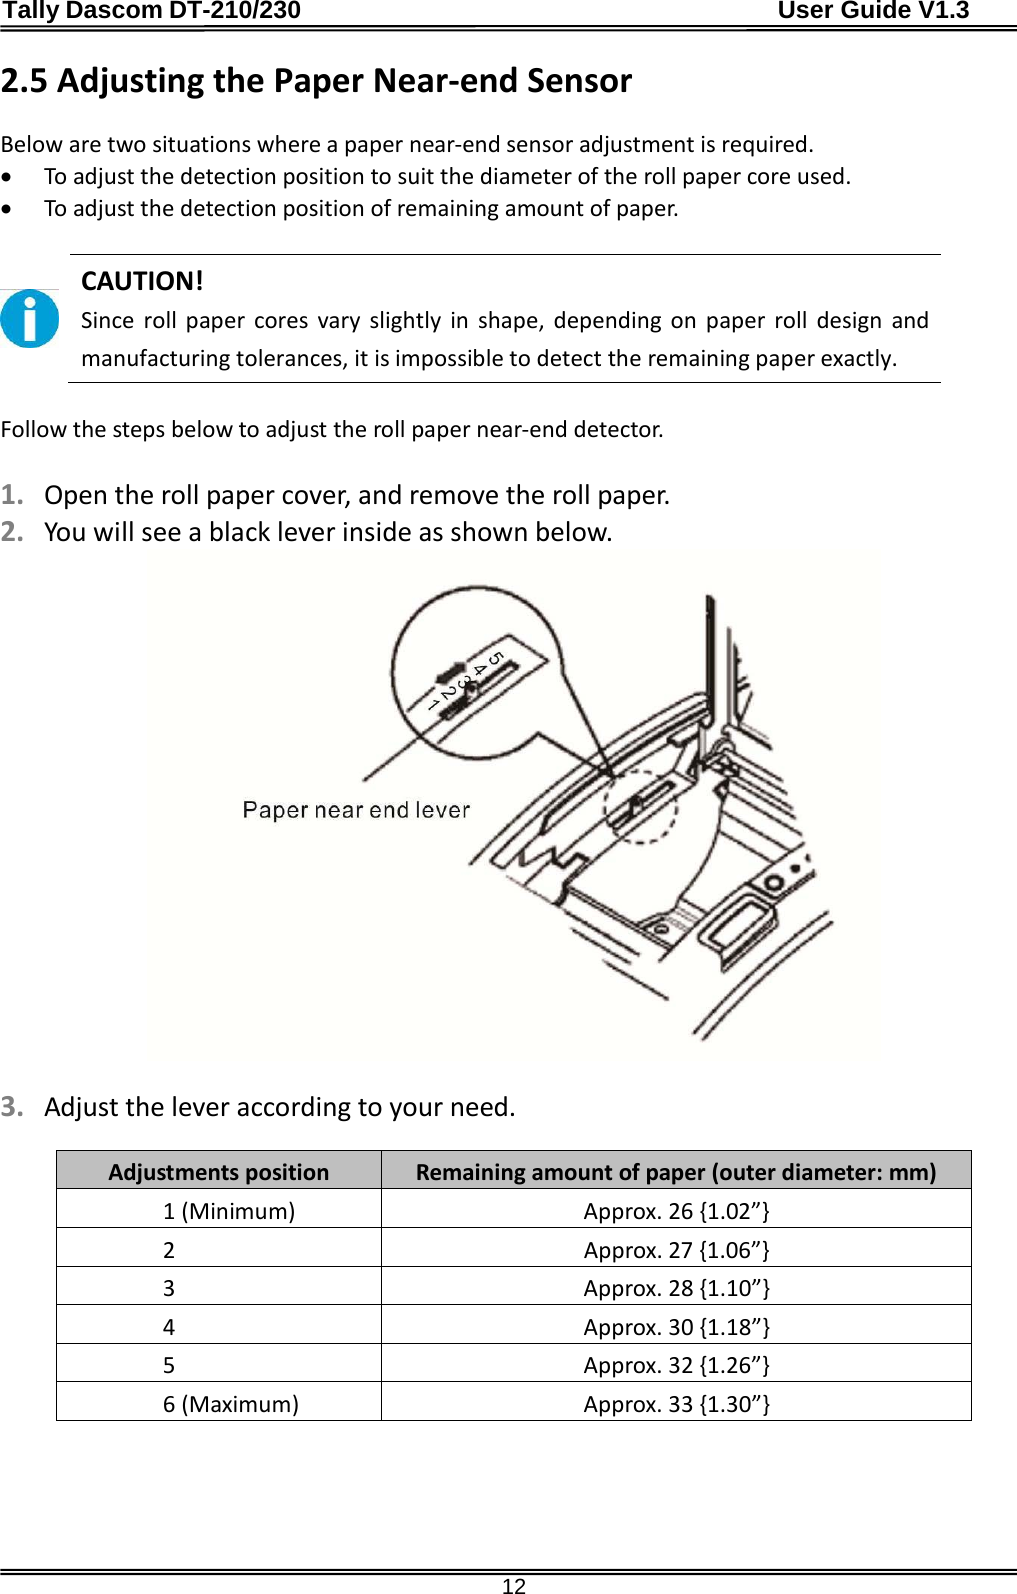 Tally Dascom DT-210/230                                      User Guide V1.3  12 2.5 Adjusting the Paper Near-end Sensor  Below are two situations where a paper near-end sensor adjustment is required. • To adjust the detection position to suit the diameter of the roll paper core used. • To adjust the detection position of remaining amount of paper.   CAUTION! Since roll paper cores vary slightly in shape, depending on paper roll design and manufacturing tolerances, it is impossible to detect the remaining paper exactly.  Follow the steps below to adjust the roll paper near-end detector.  1. Open the roll paper cover, and remove the roll paper. 2. You will see a black lever inside as shown below.   3. Adjust the lever according to your need.  Adjustments position Remaining amount of paper (outer diameter: mm) 1 (Minimum) Approx. 26 {1.02”} 2  Approx. 27 {1.06”} 3  Approx. 28 {1.10”} 4  Approx. 30 {1.18”} 5  Approx. 32 {1.26”} 6 (Maximum)  Approx. 33 {1.30”} 